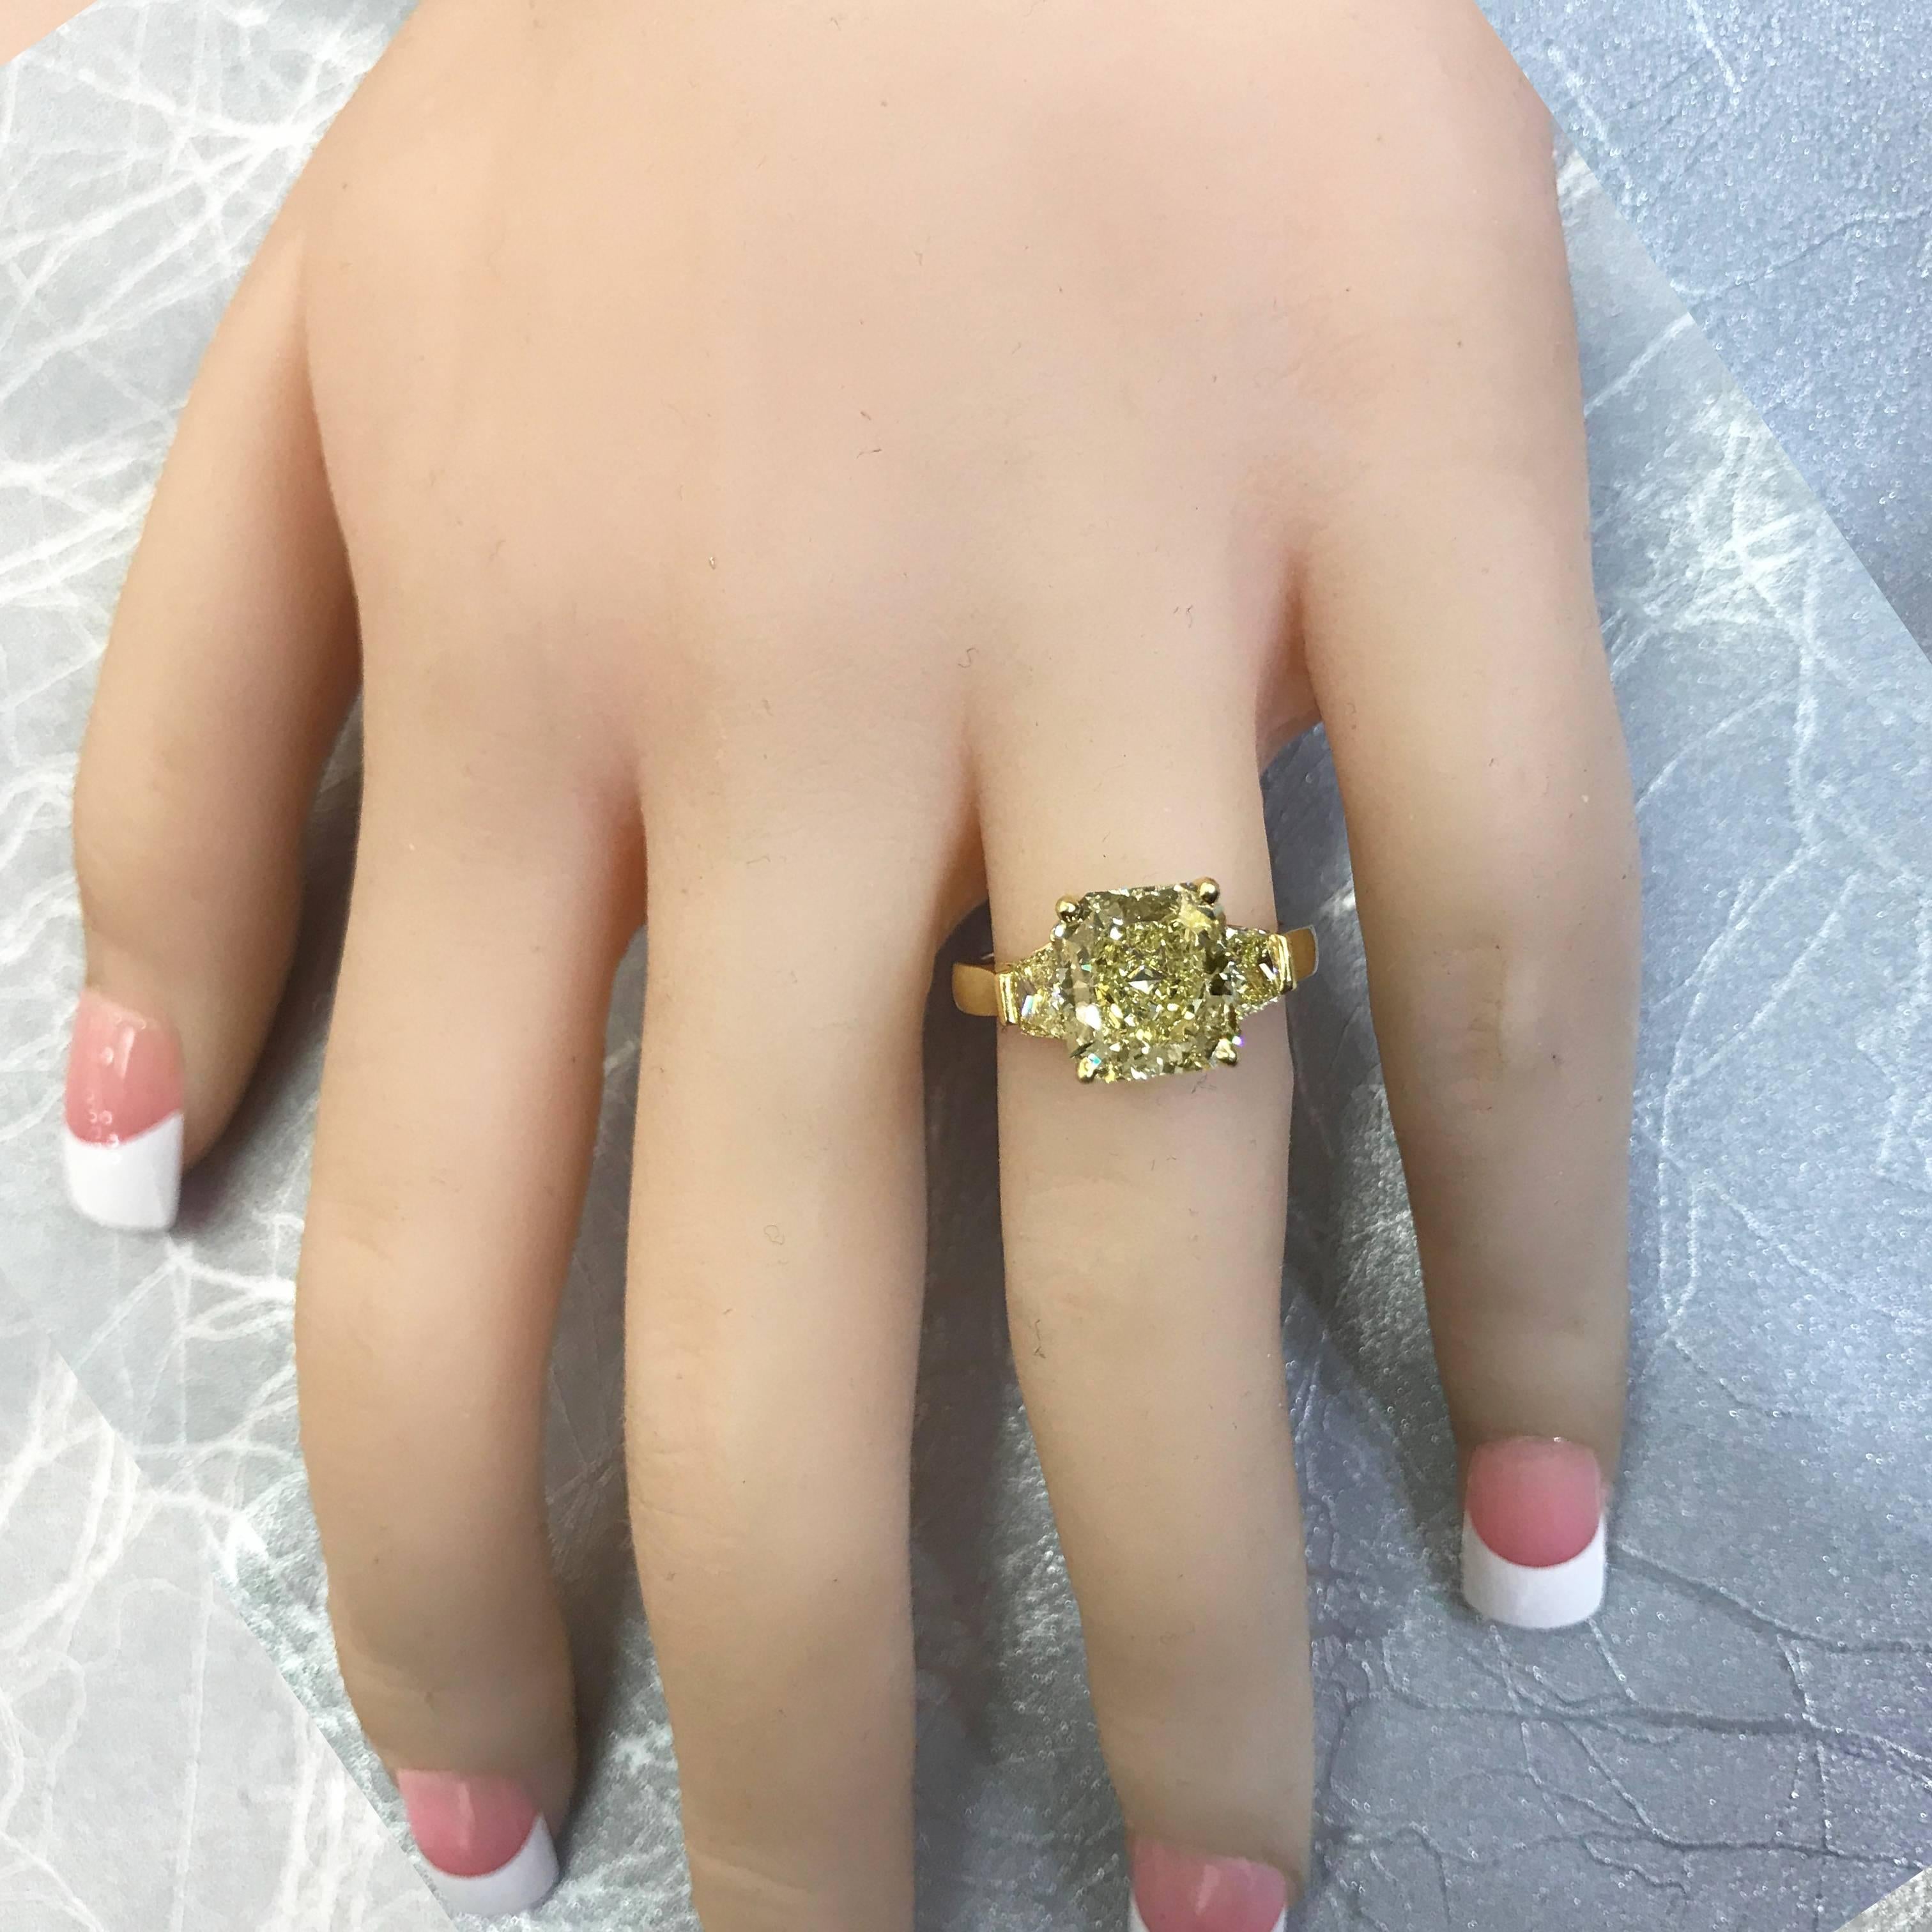 Make that proposal extra special with this exceptional yellow diamond engagement ring. Handcrafted in 18k yellow gold, this engagement ring features a 3.10 carat radiant cut diamond that GIA certified as Fancy Yellow color, VS1 clarity. Flanking the